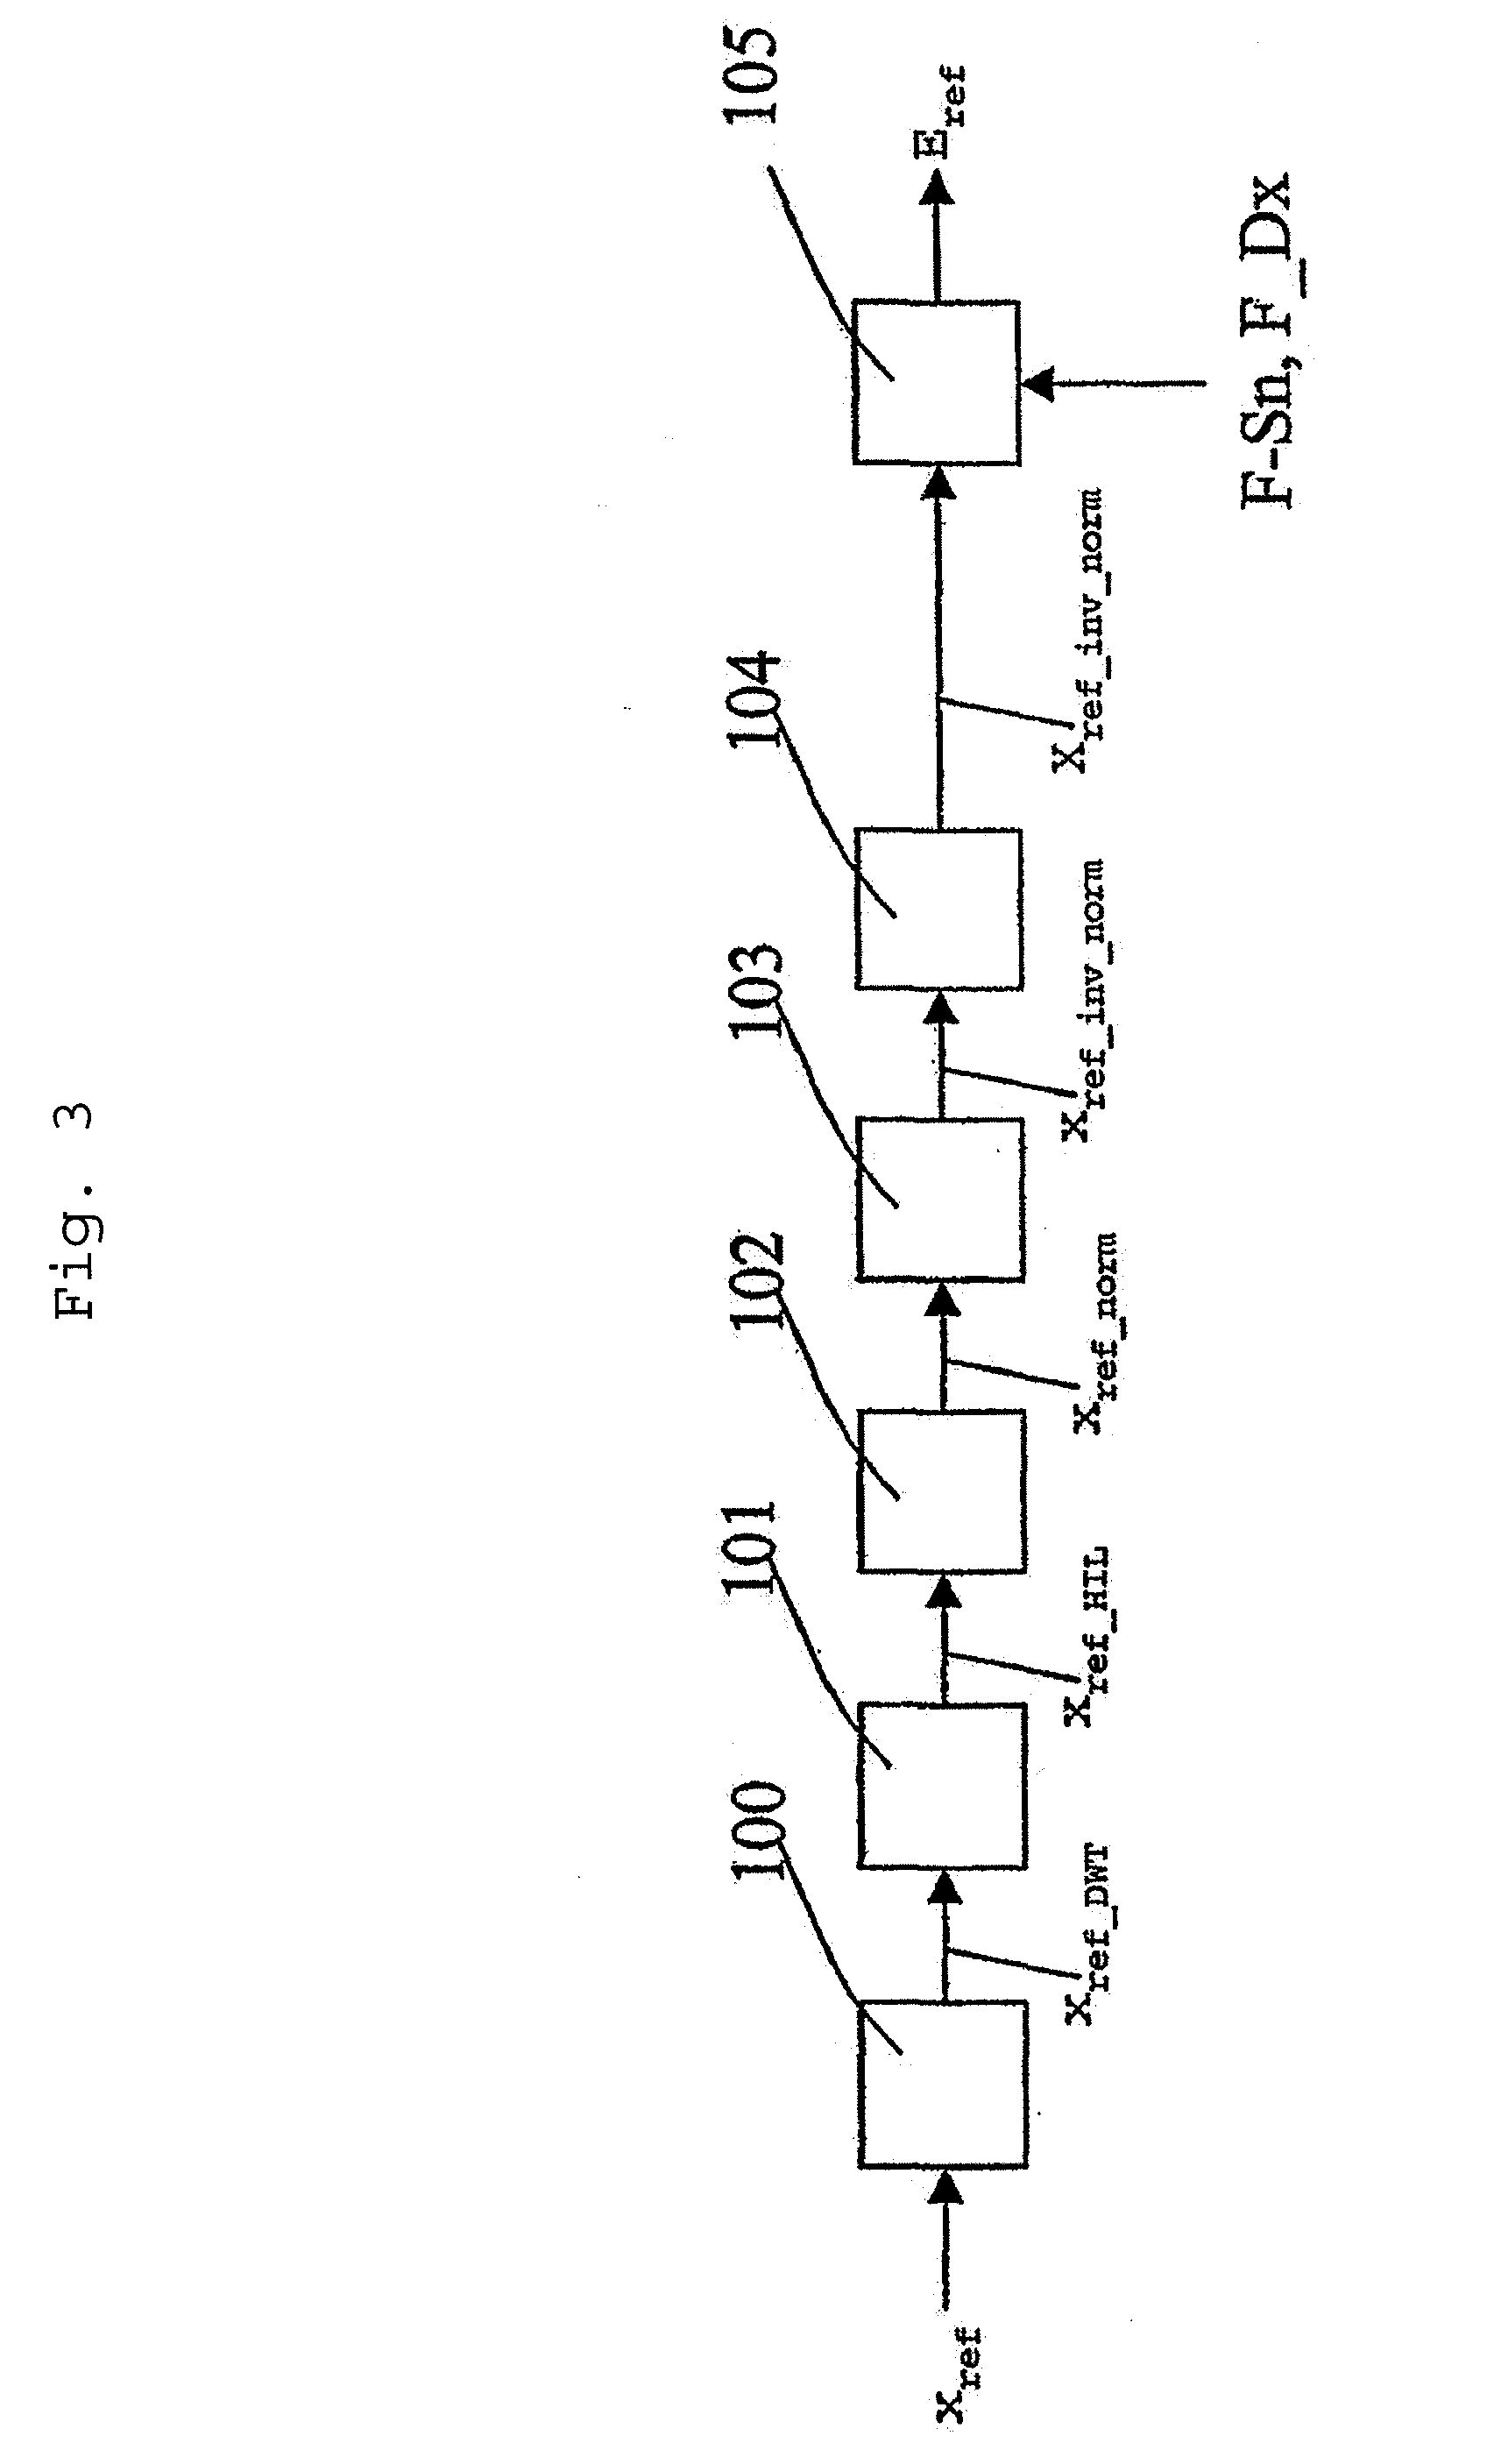 Method for controlling the quality of industrial processes, in particular laser-welding processes